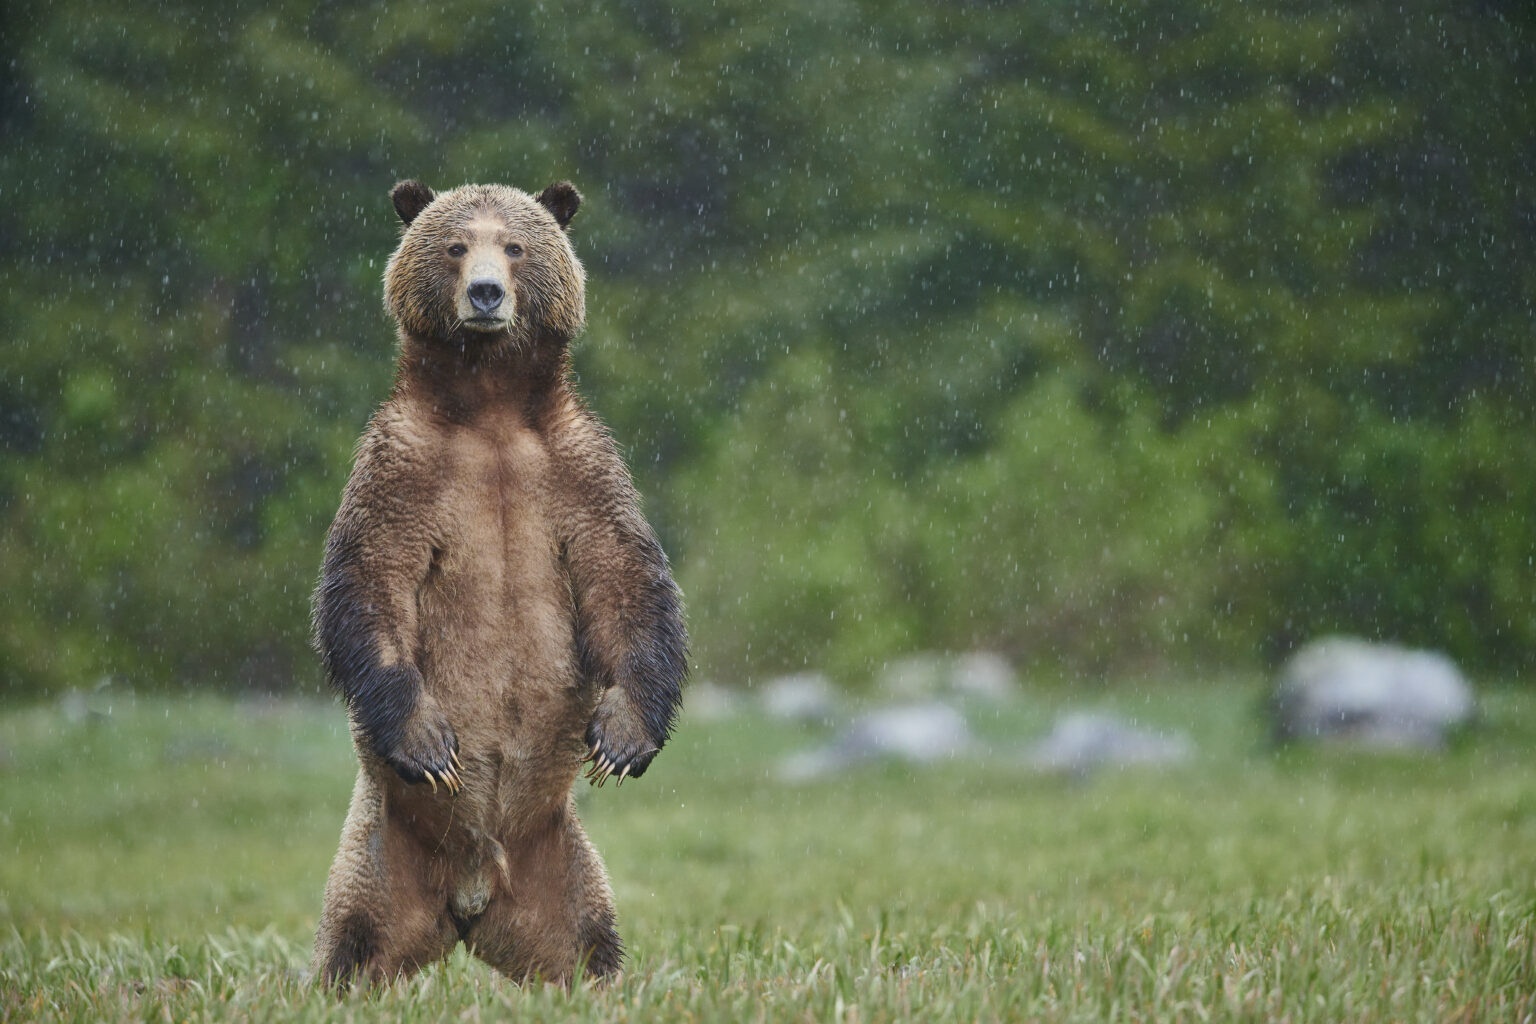 Boar Grizzly Bear Standing up on hind legs